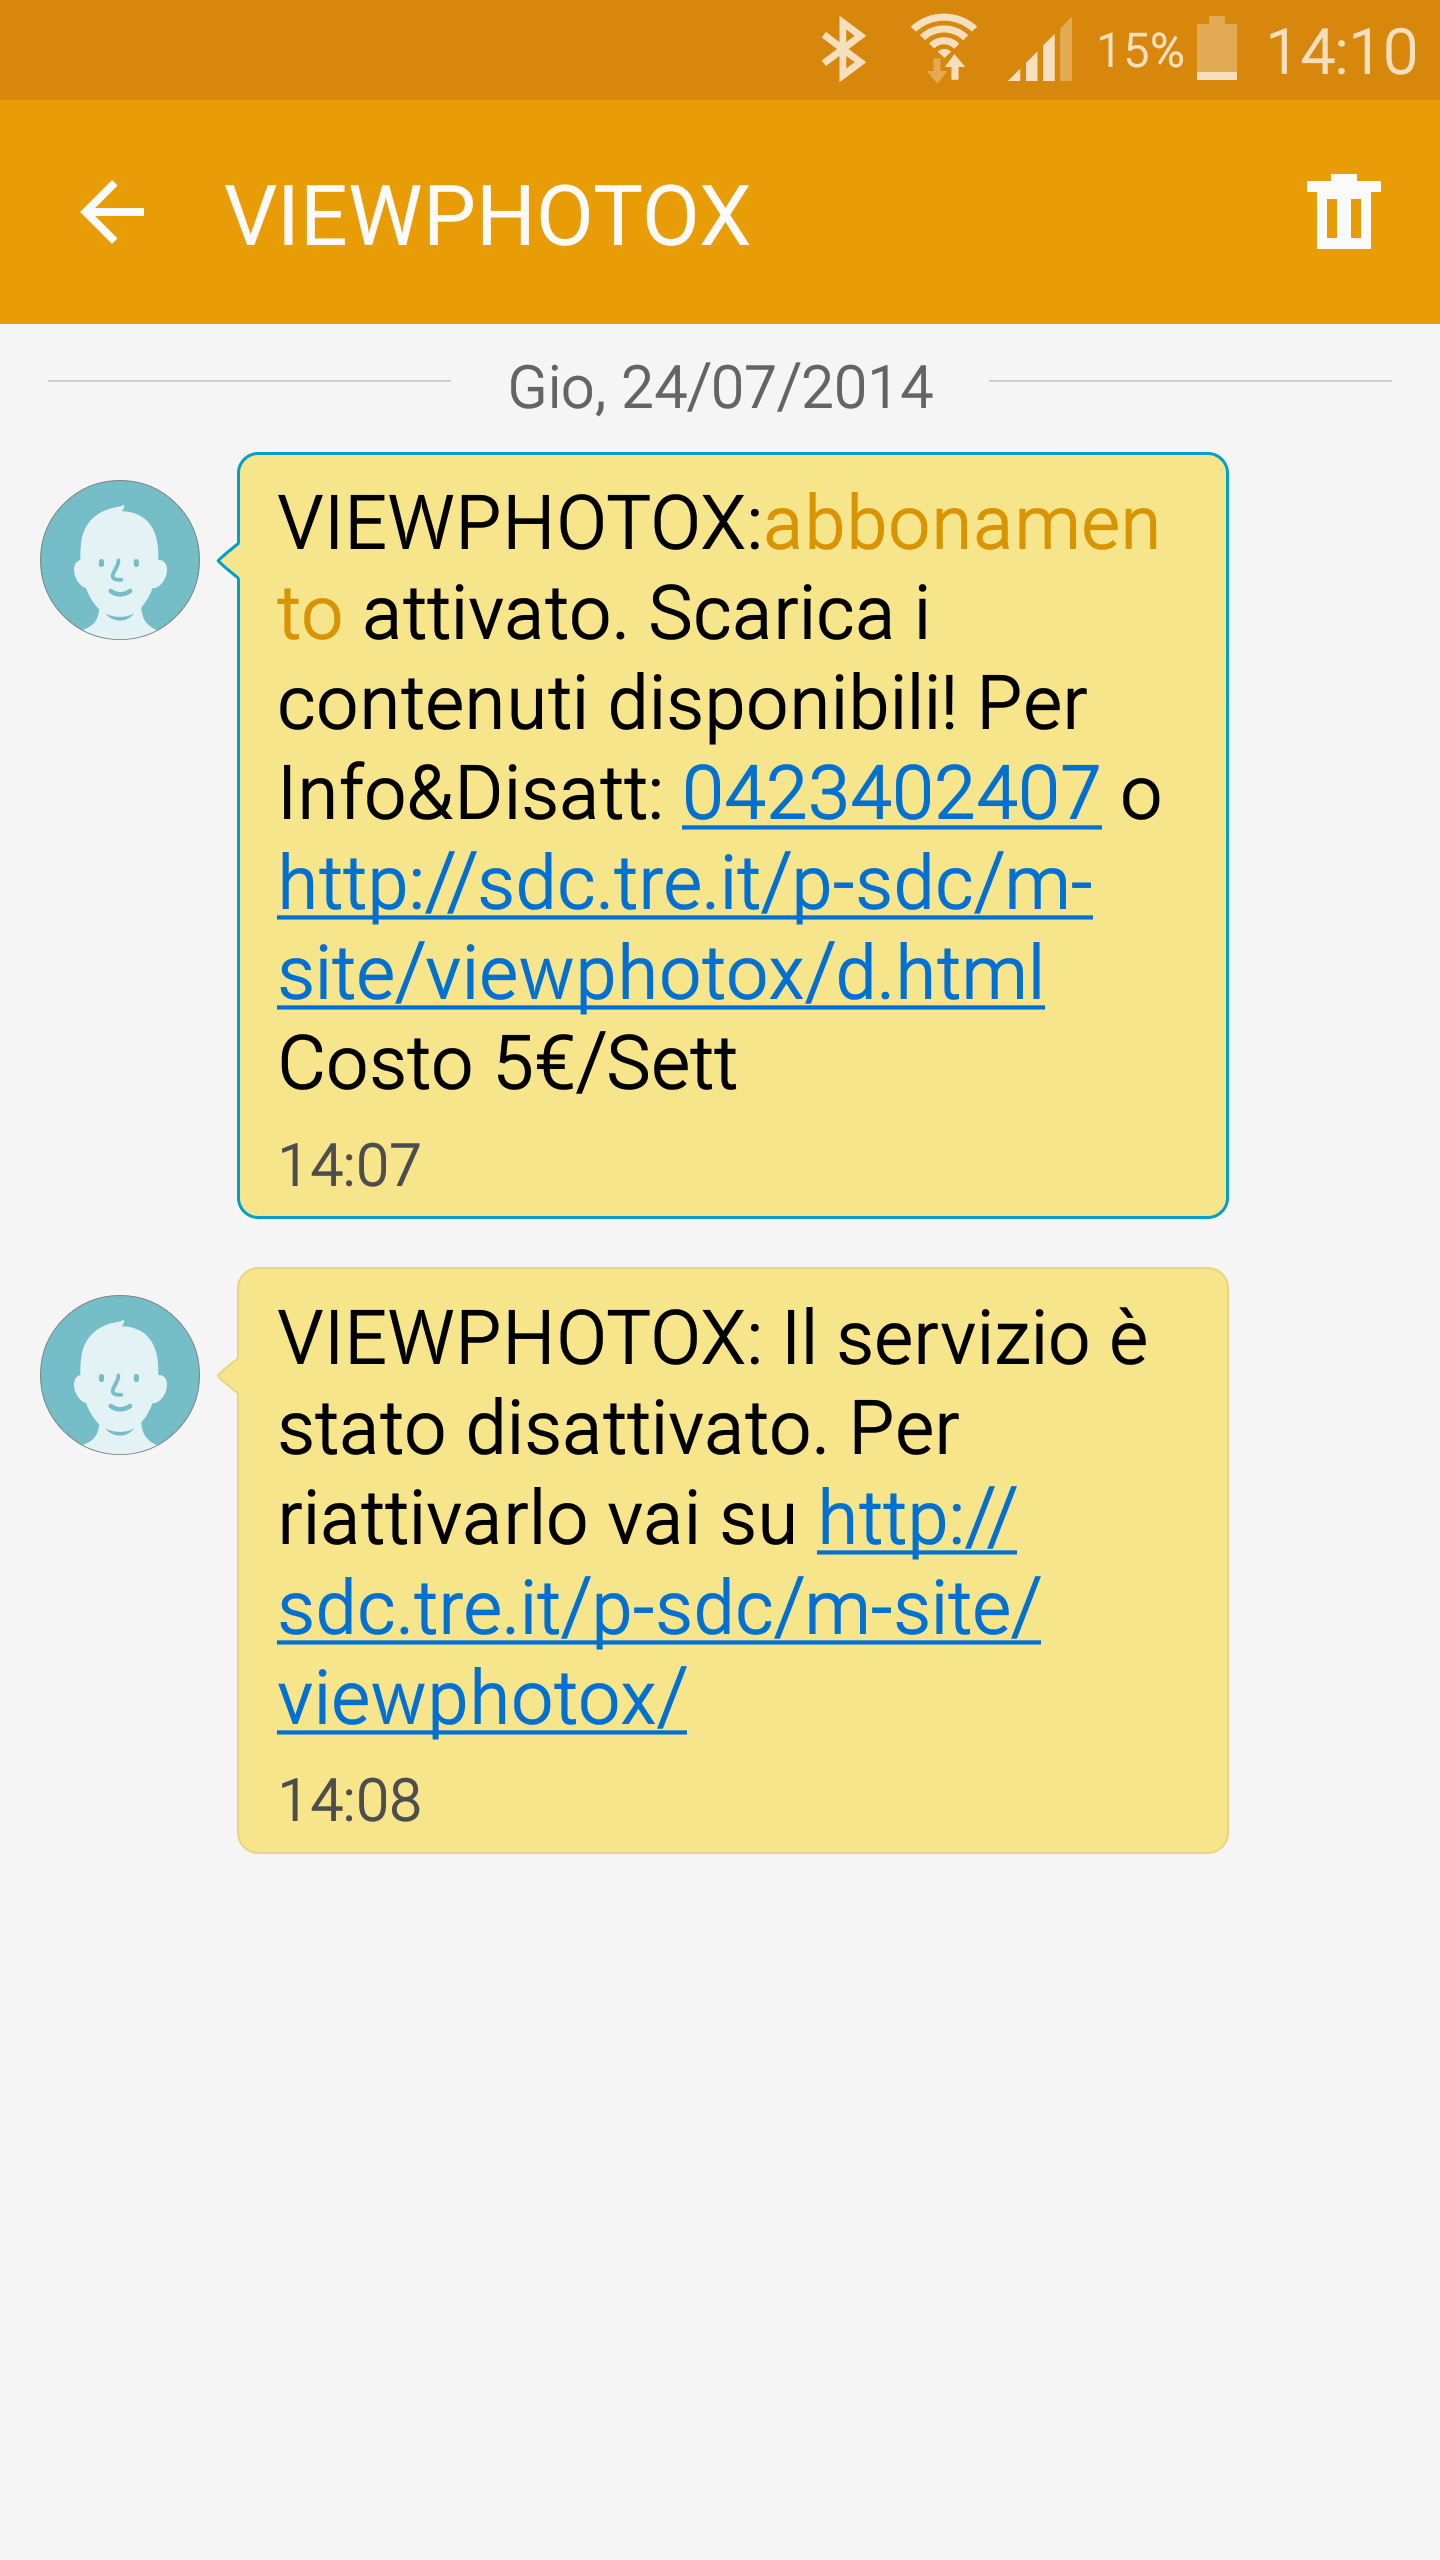 VIEWPHOTOX, h3g three Italy unrequested subscription, 24/07/2014